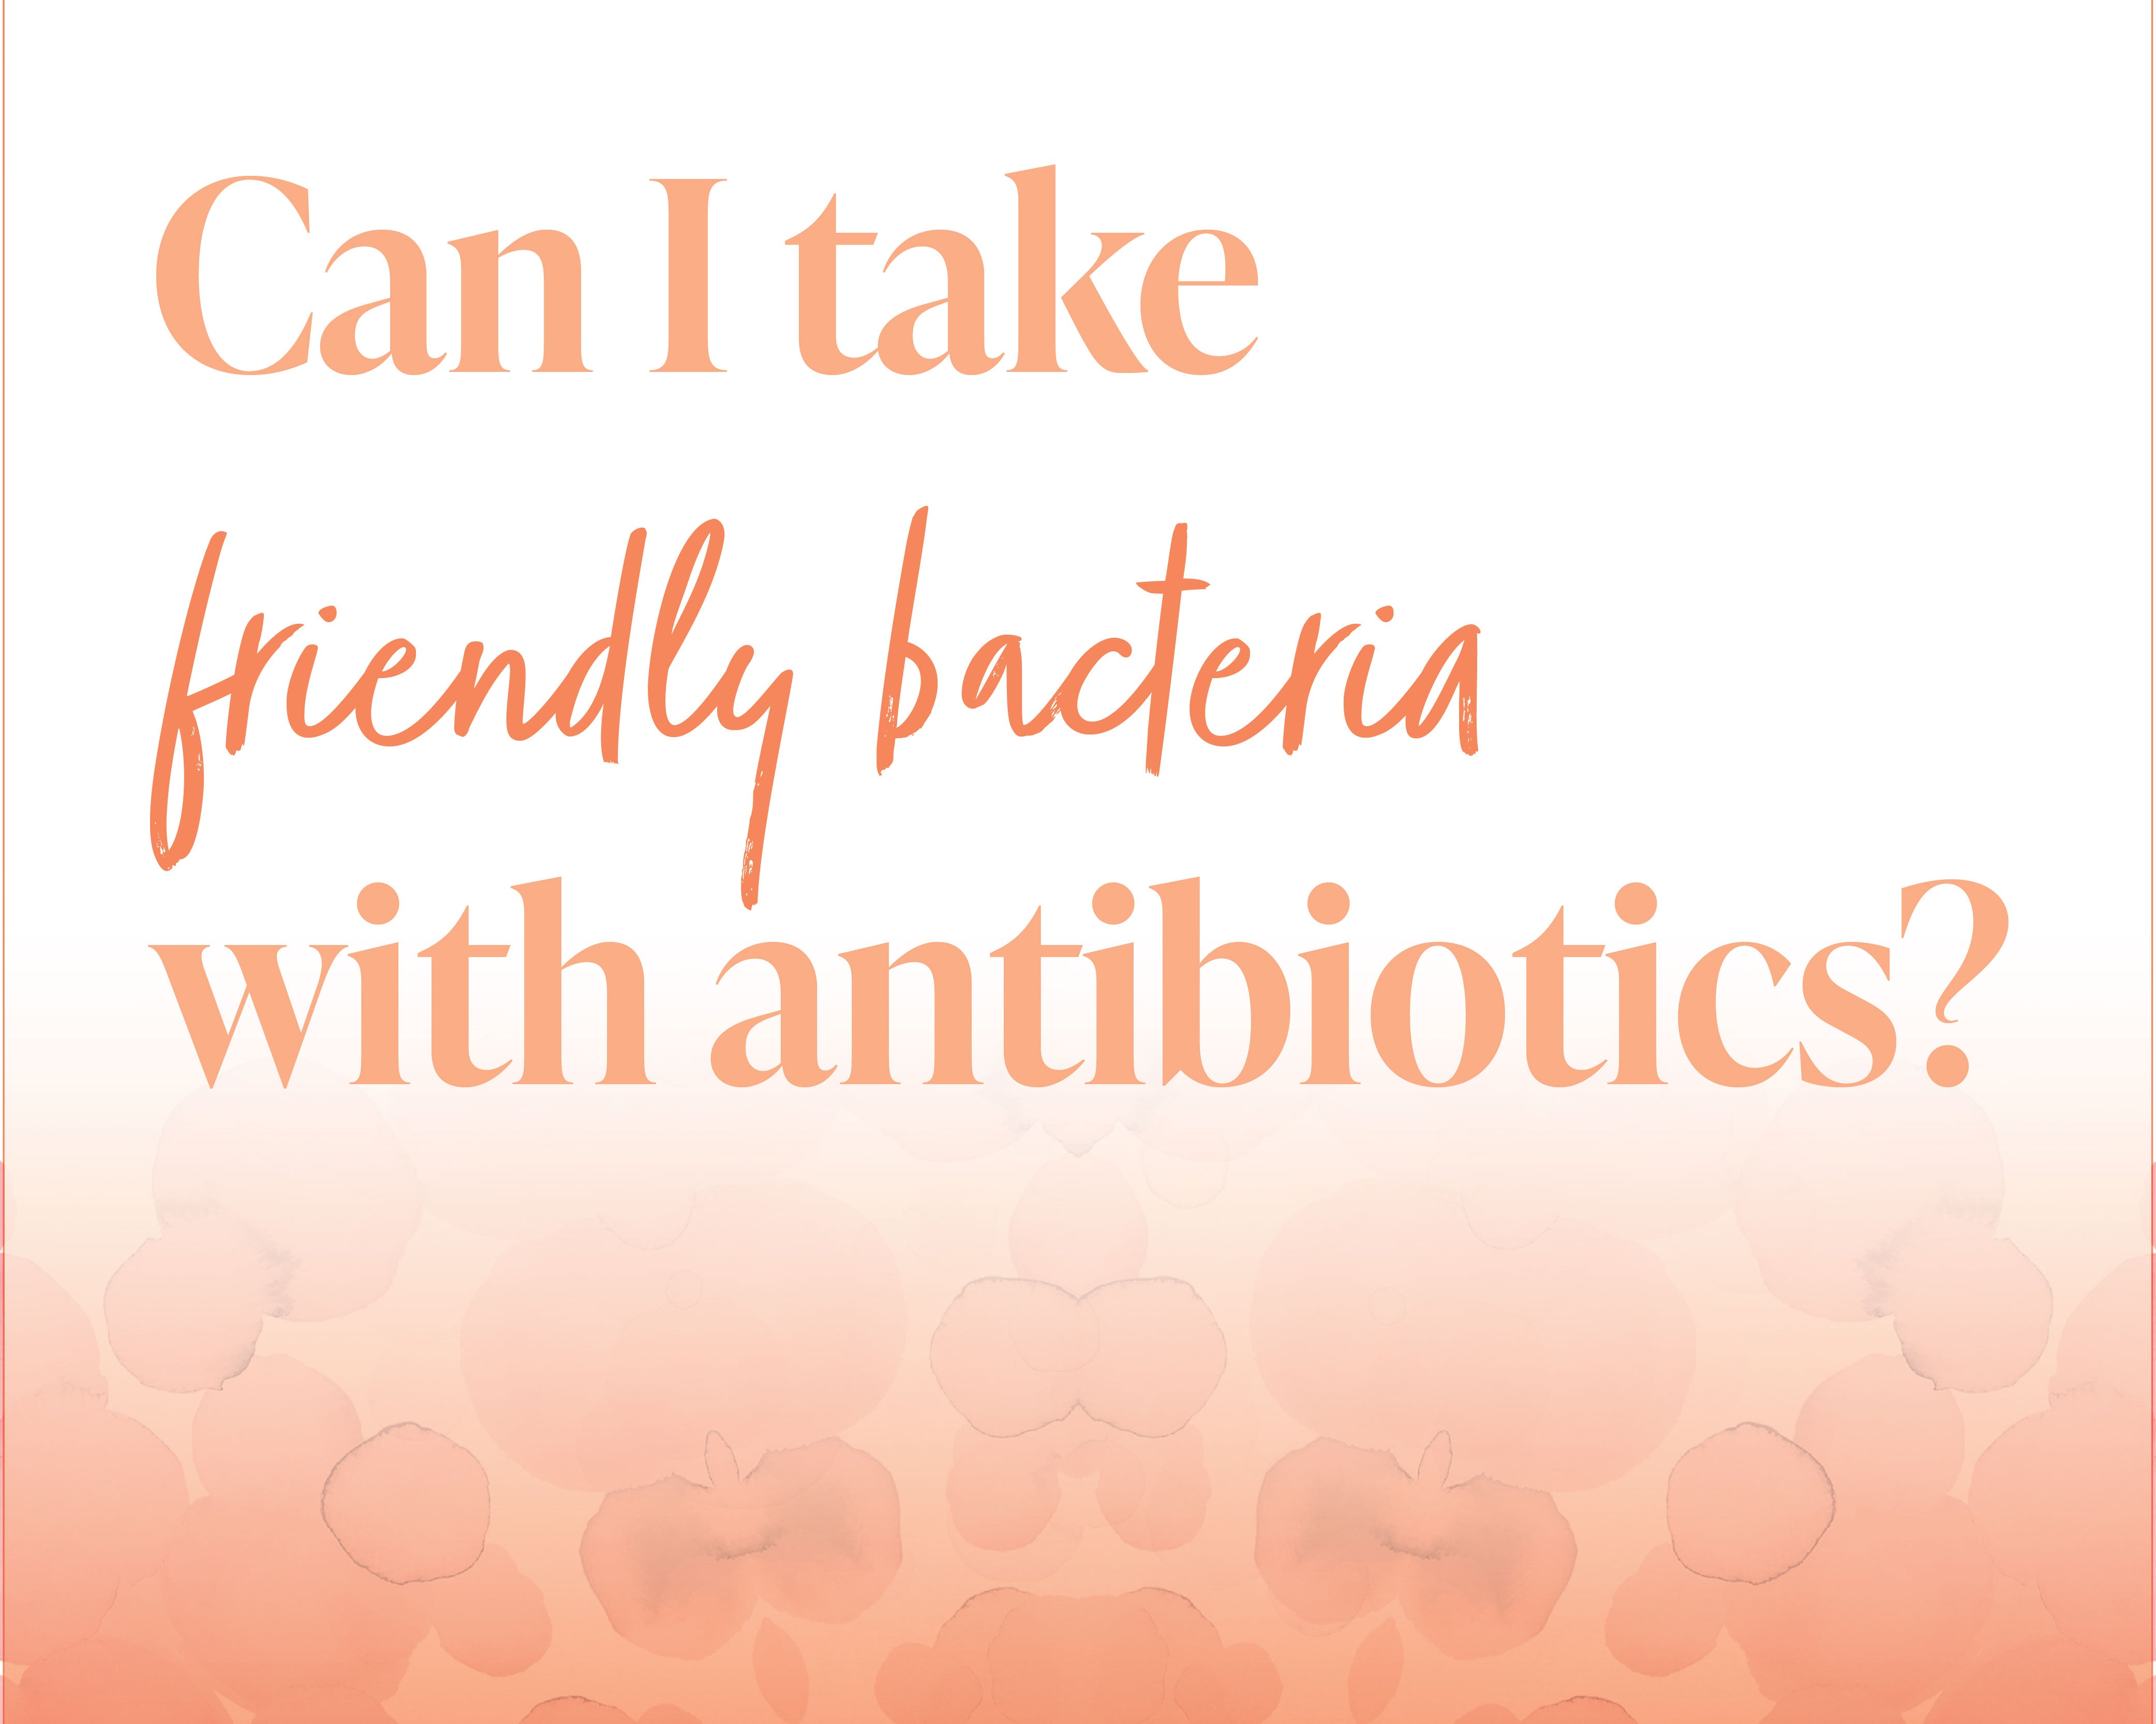 Frequently asked questions: Can I take friendly bacteria with antibiotics?